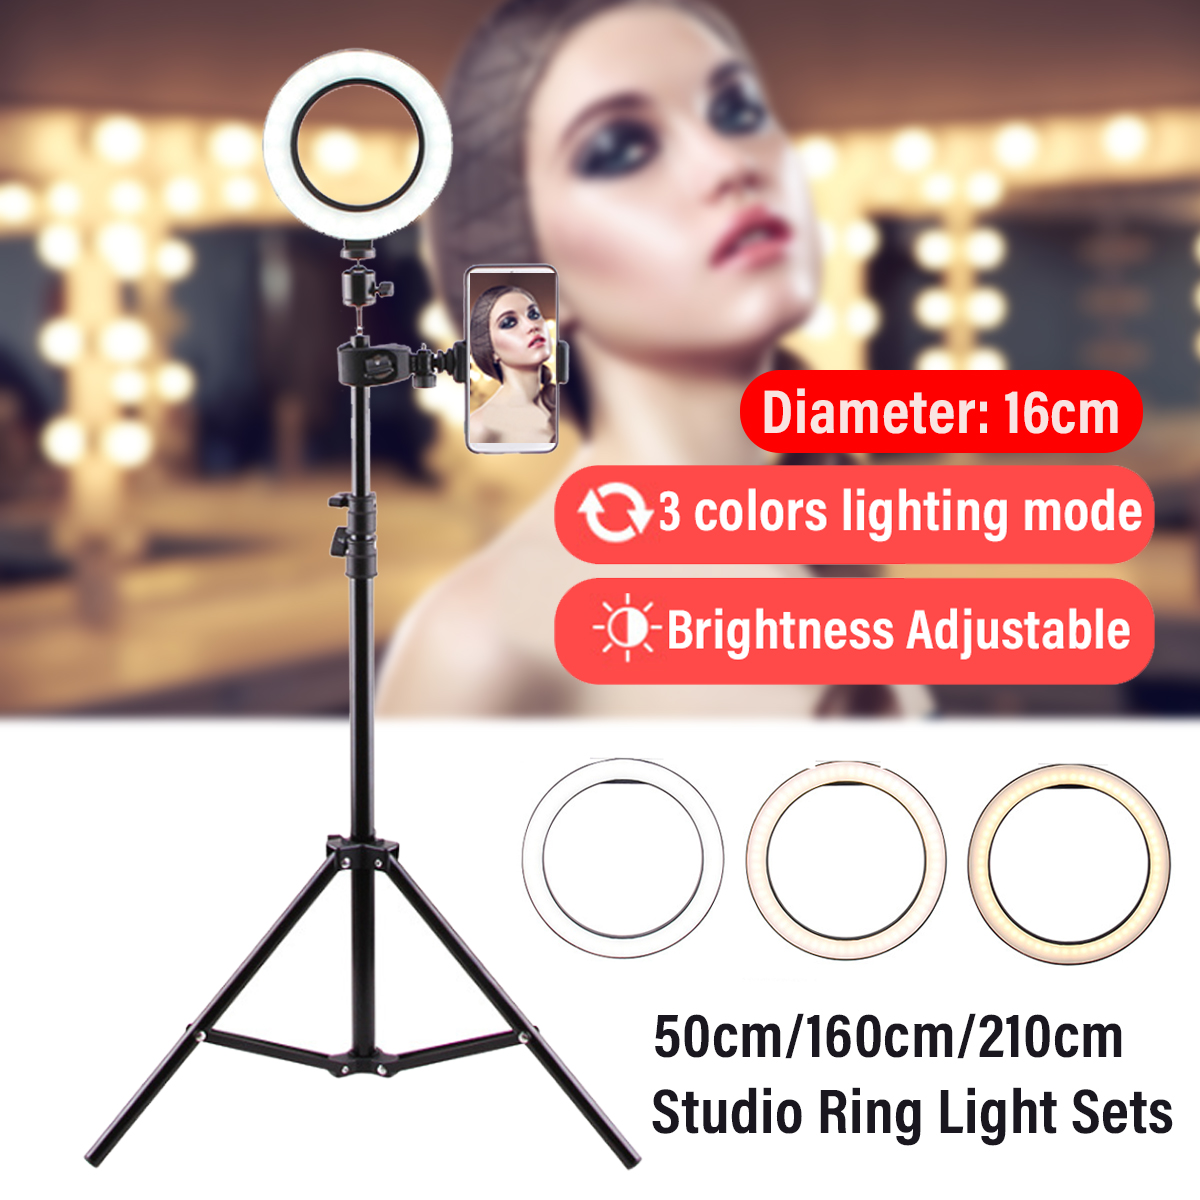 16cm-LED-Ring-Light-Dimmable-LED-Beauty-Ring-Fill-Light-Photography-for-Selfie-Live-Stream-Broadcast-1701207-1